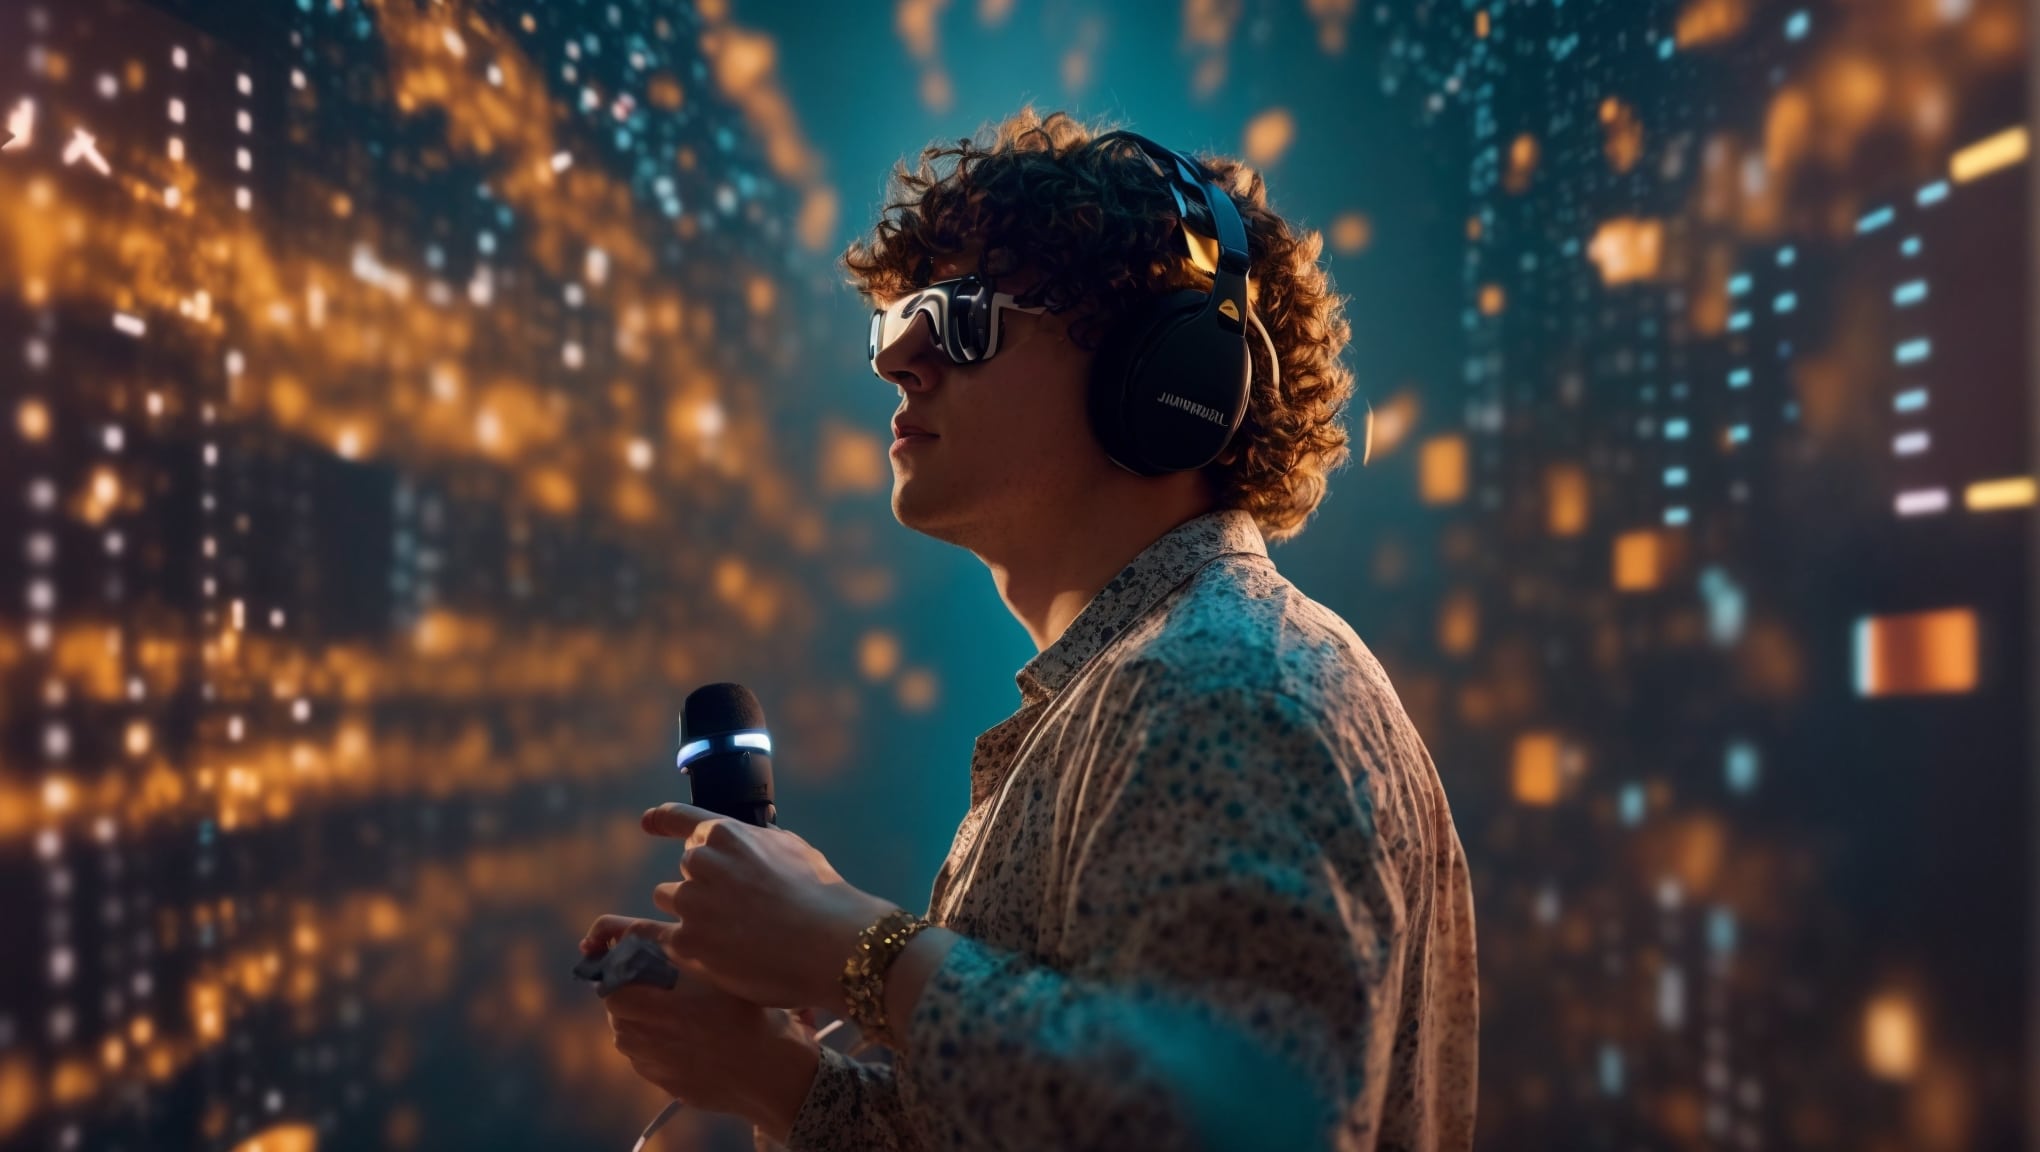 Louisville's Jack Harlow Teams Up with Meta for 'No Place Like Home' VR Concert | FinOracle